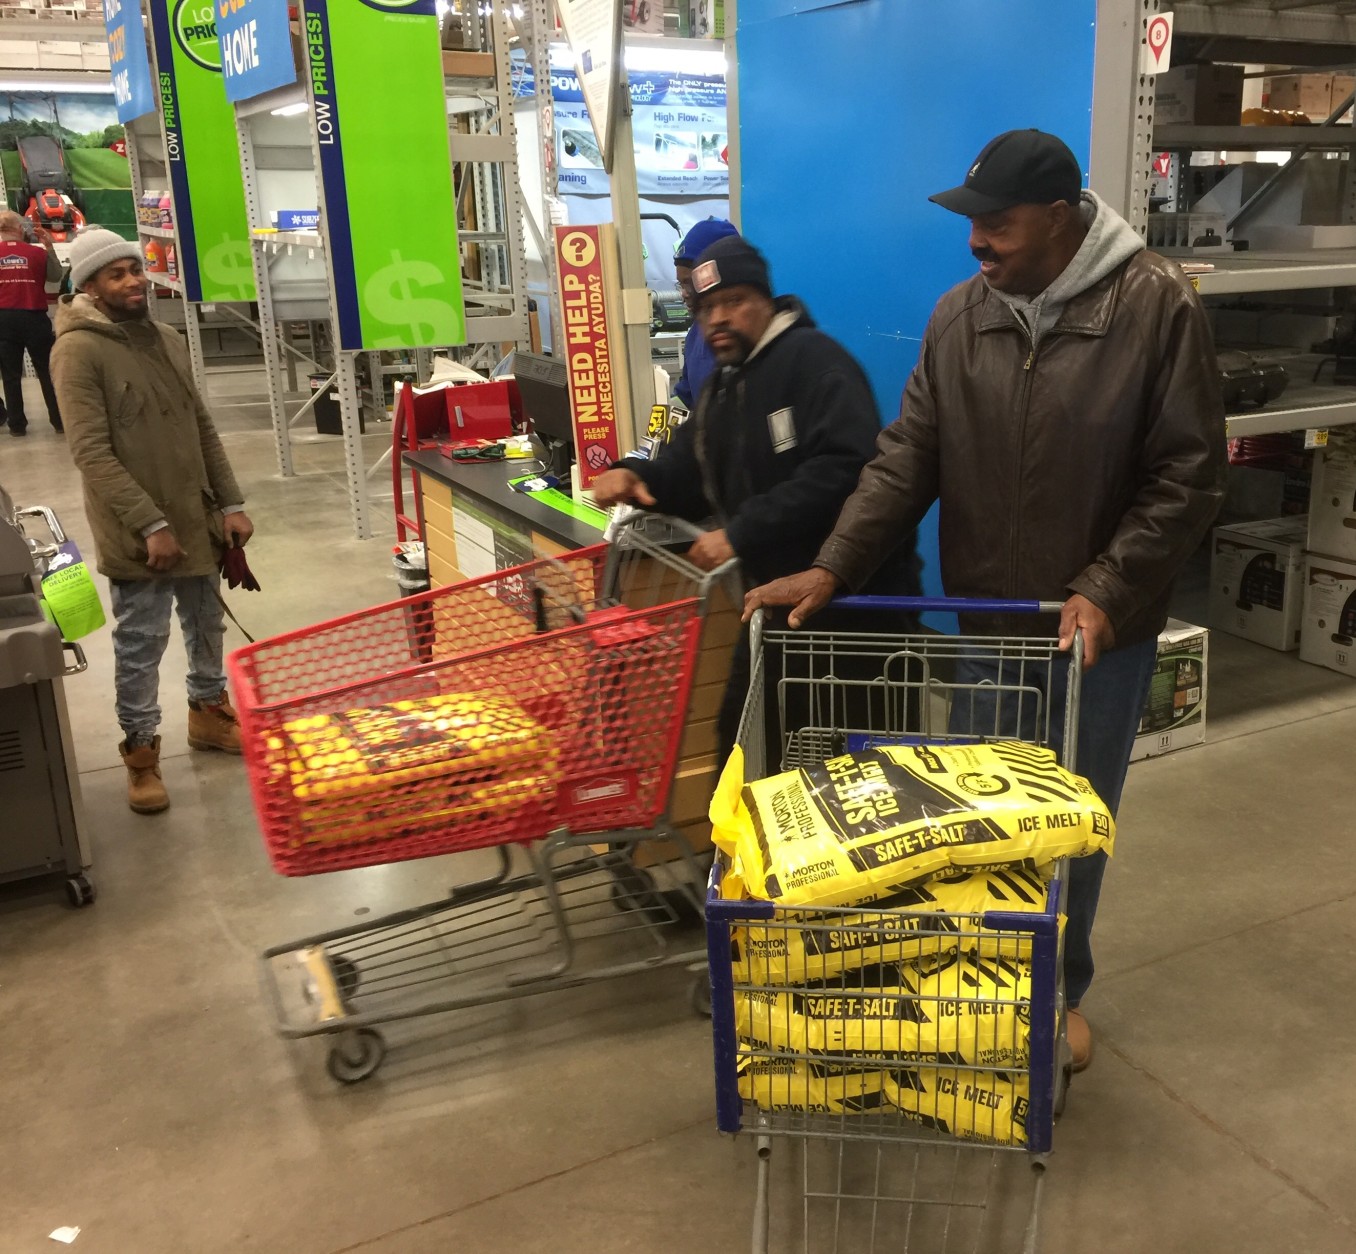 George Currie of Oxon Hill on left, doesn't need the 200 pounds of ice melt in his cart. "I can't say what other people would do. But this is in our [he and his wife’s] hearts to get enough so if someone doesn't have - it's enough for them too." 